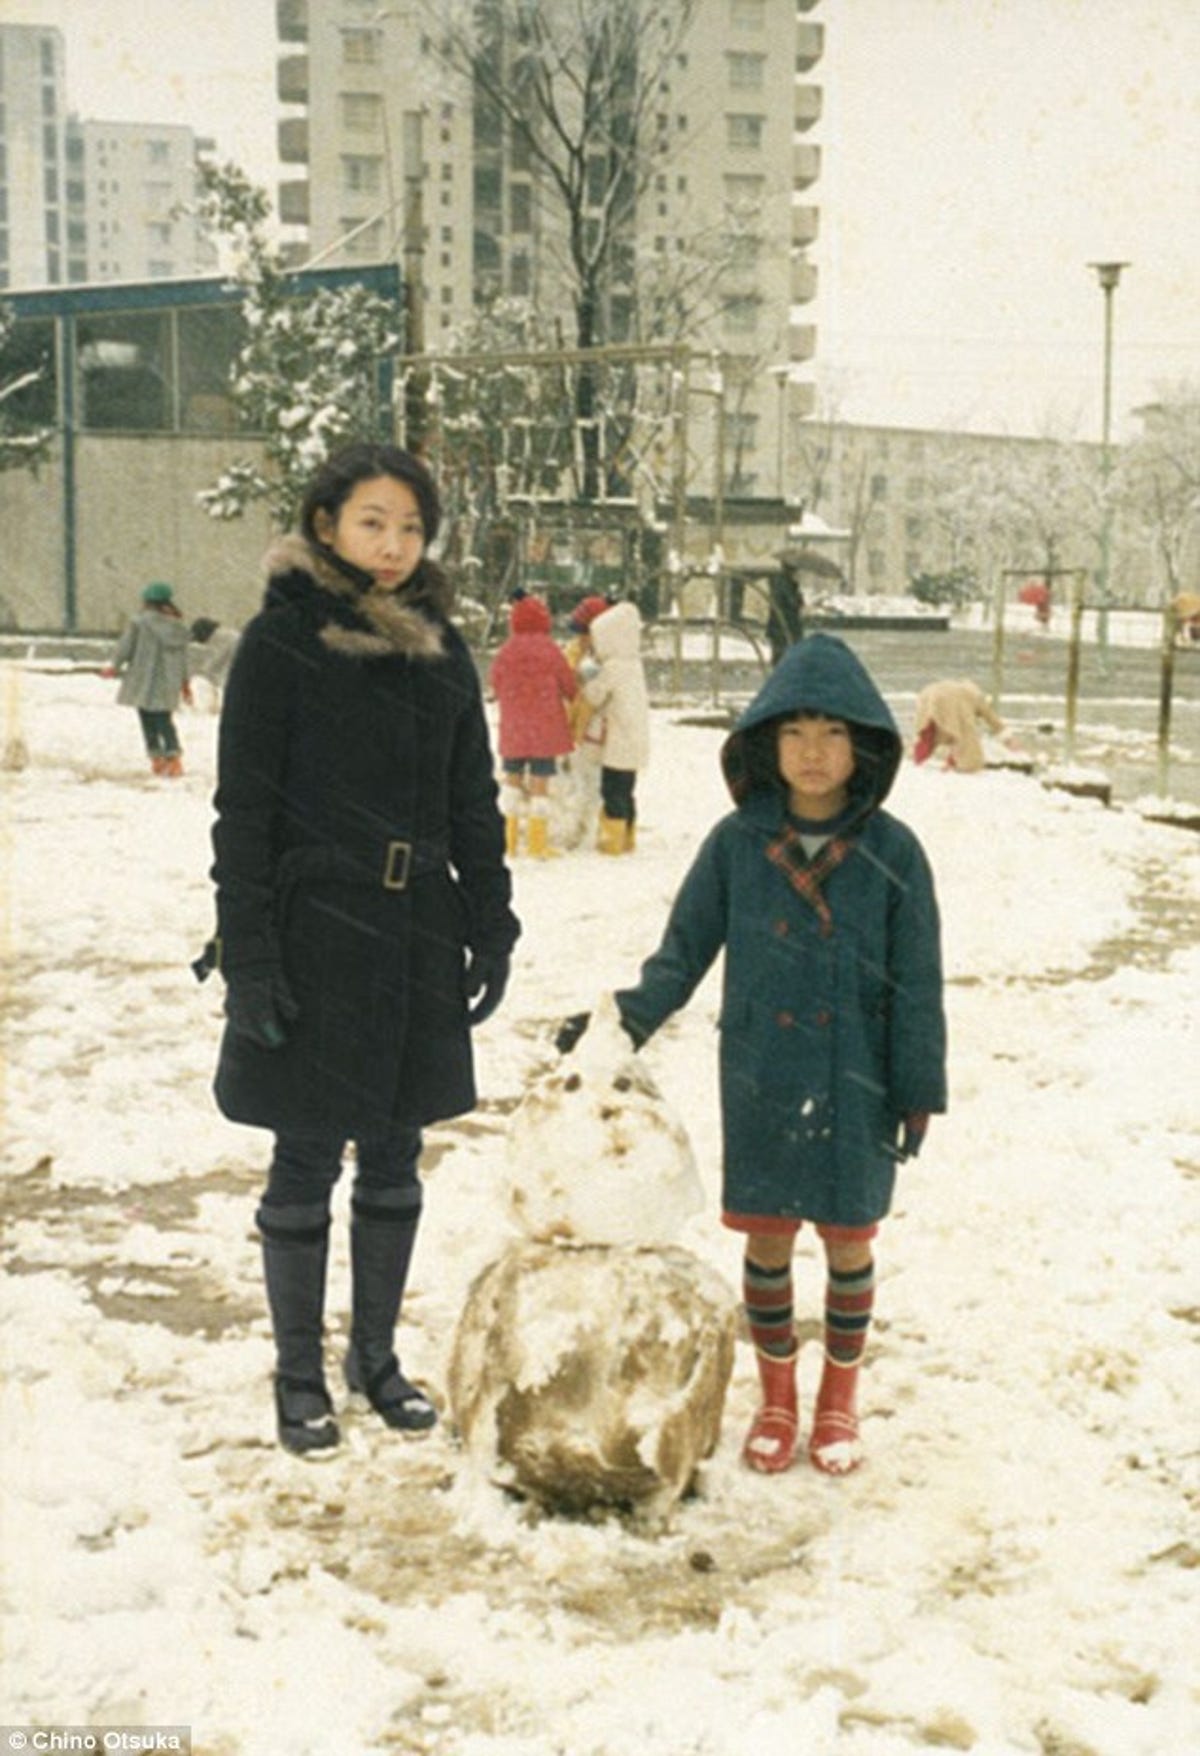 Photographer Chino Otsuka went back in time and built a snowman with the kid version of herself from 1980 in Nagayama, Japan in her photo series 